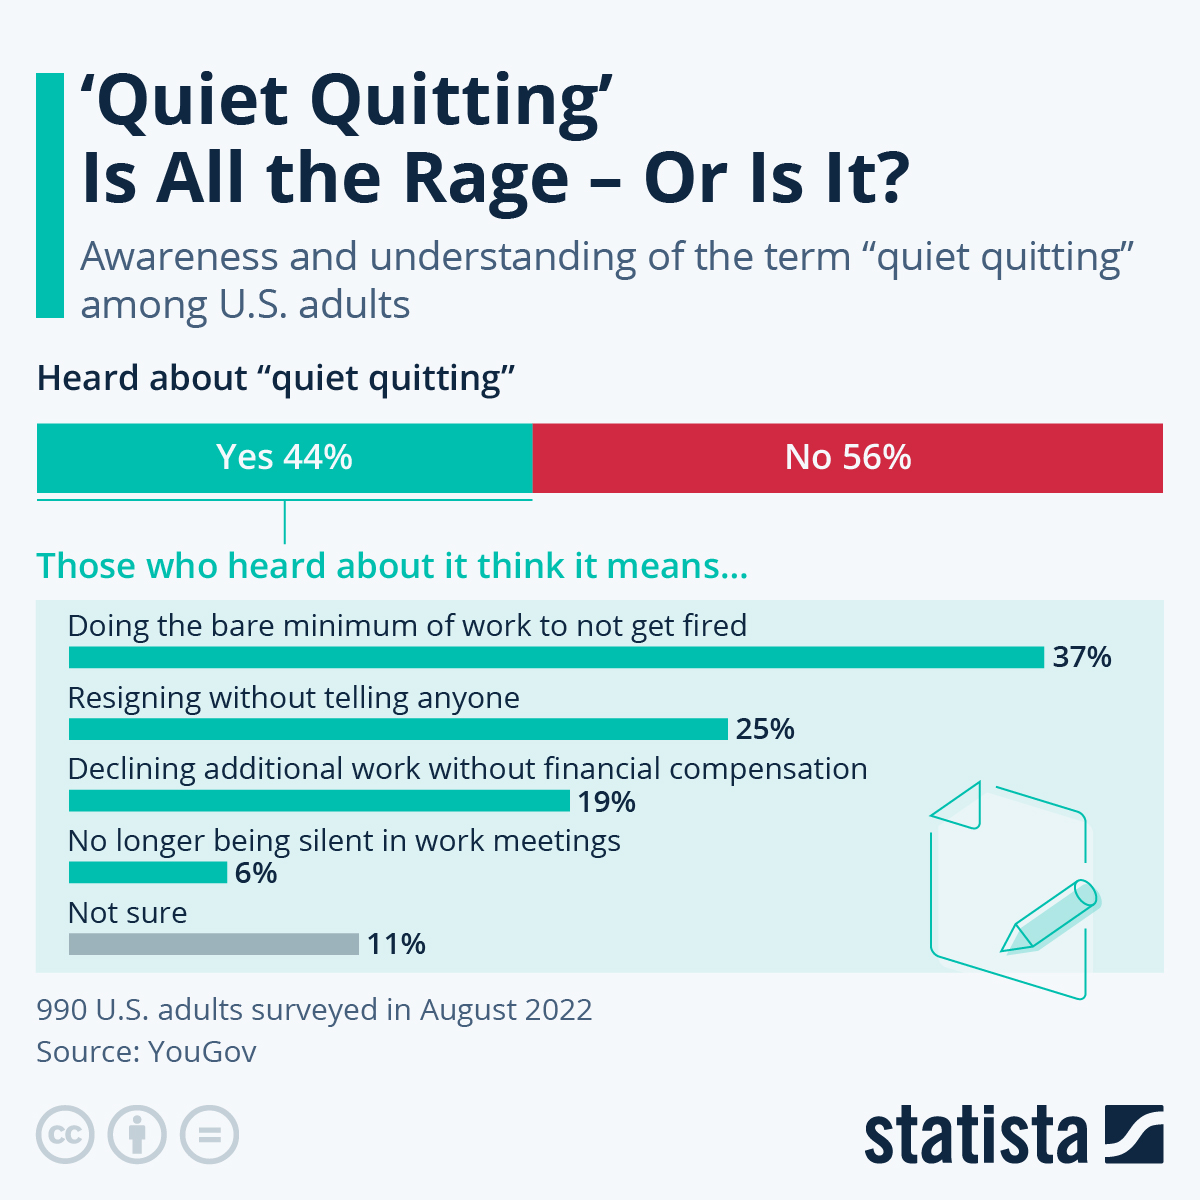 56% of adults had never heard of the term “quiet quitting”, and among those who had, there were different perceptions of what the term actually means